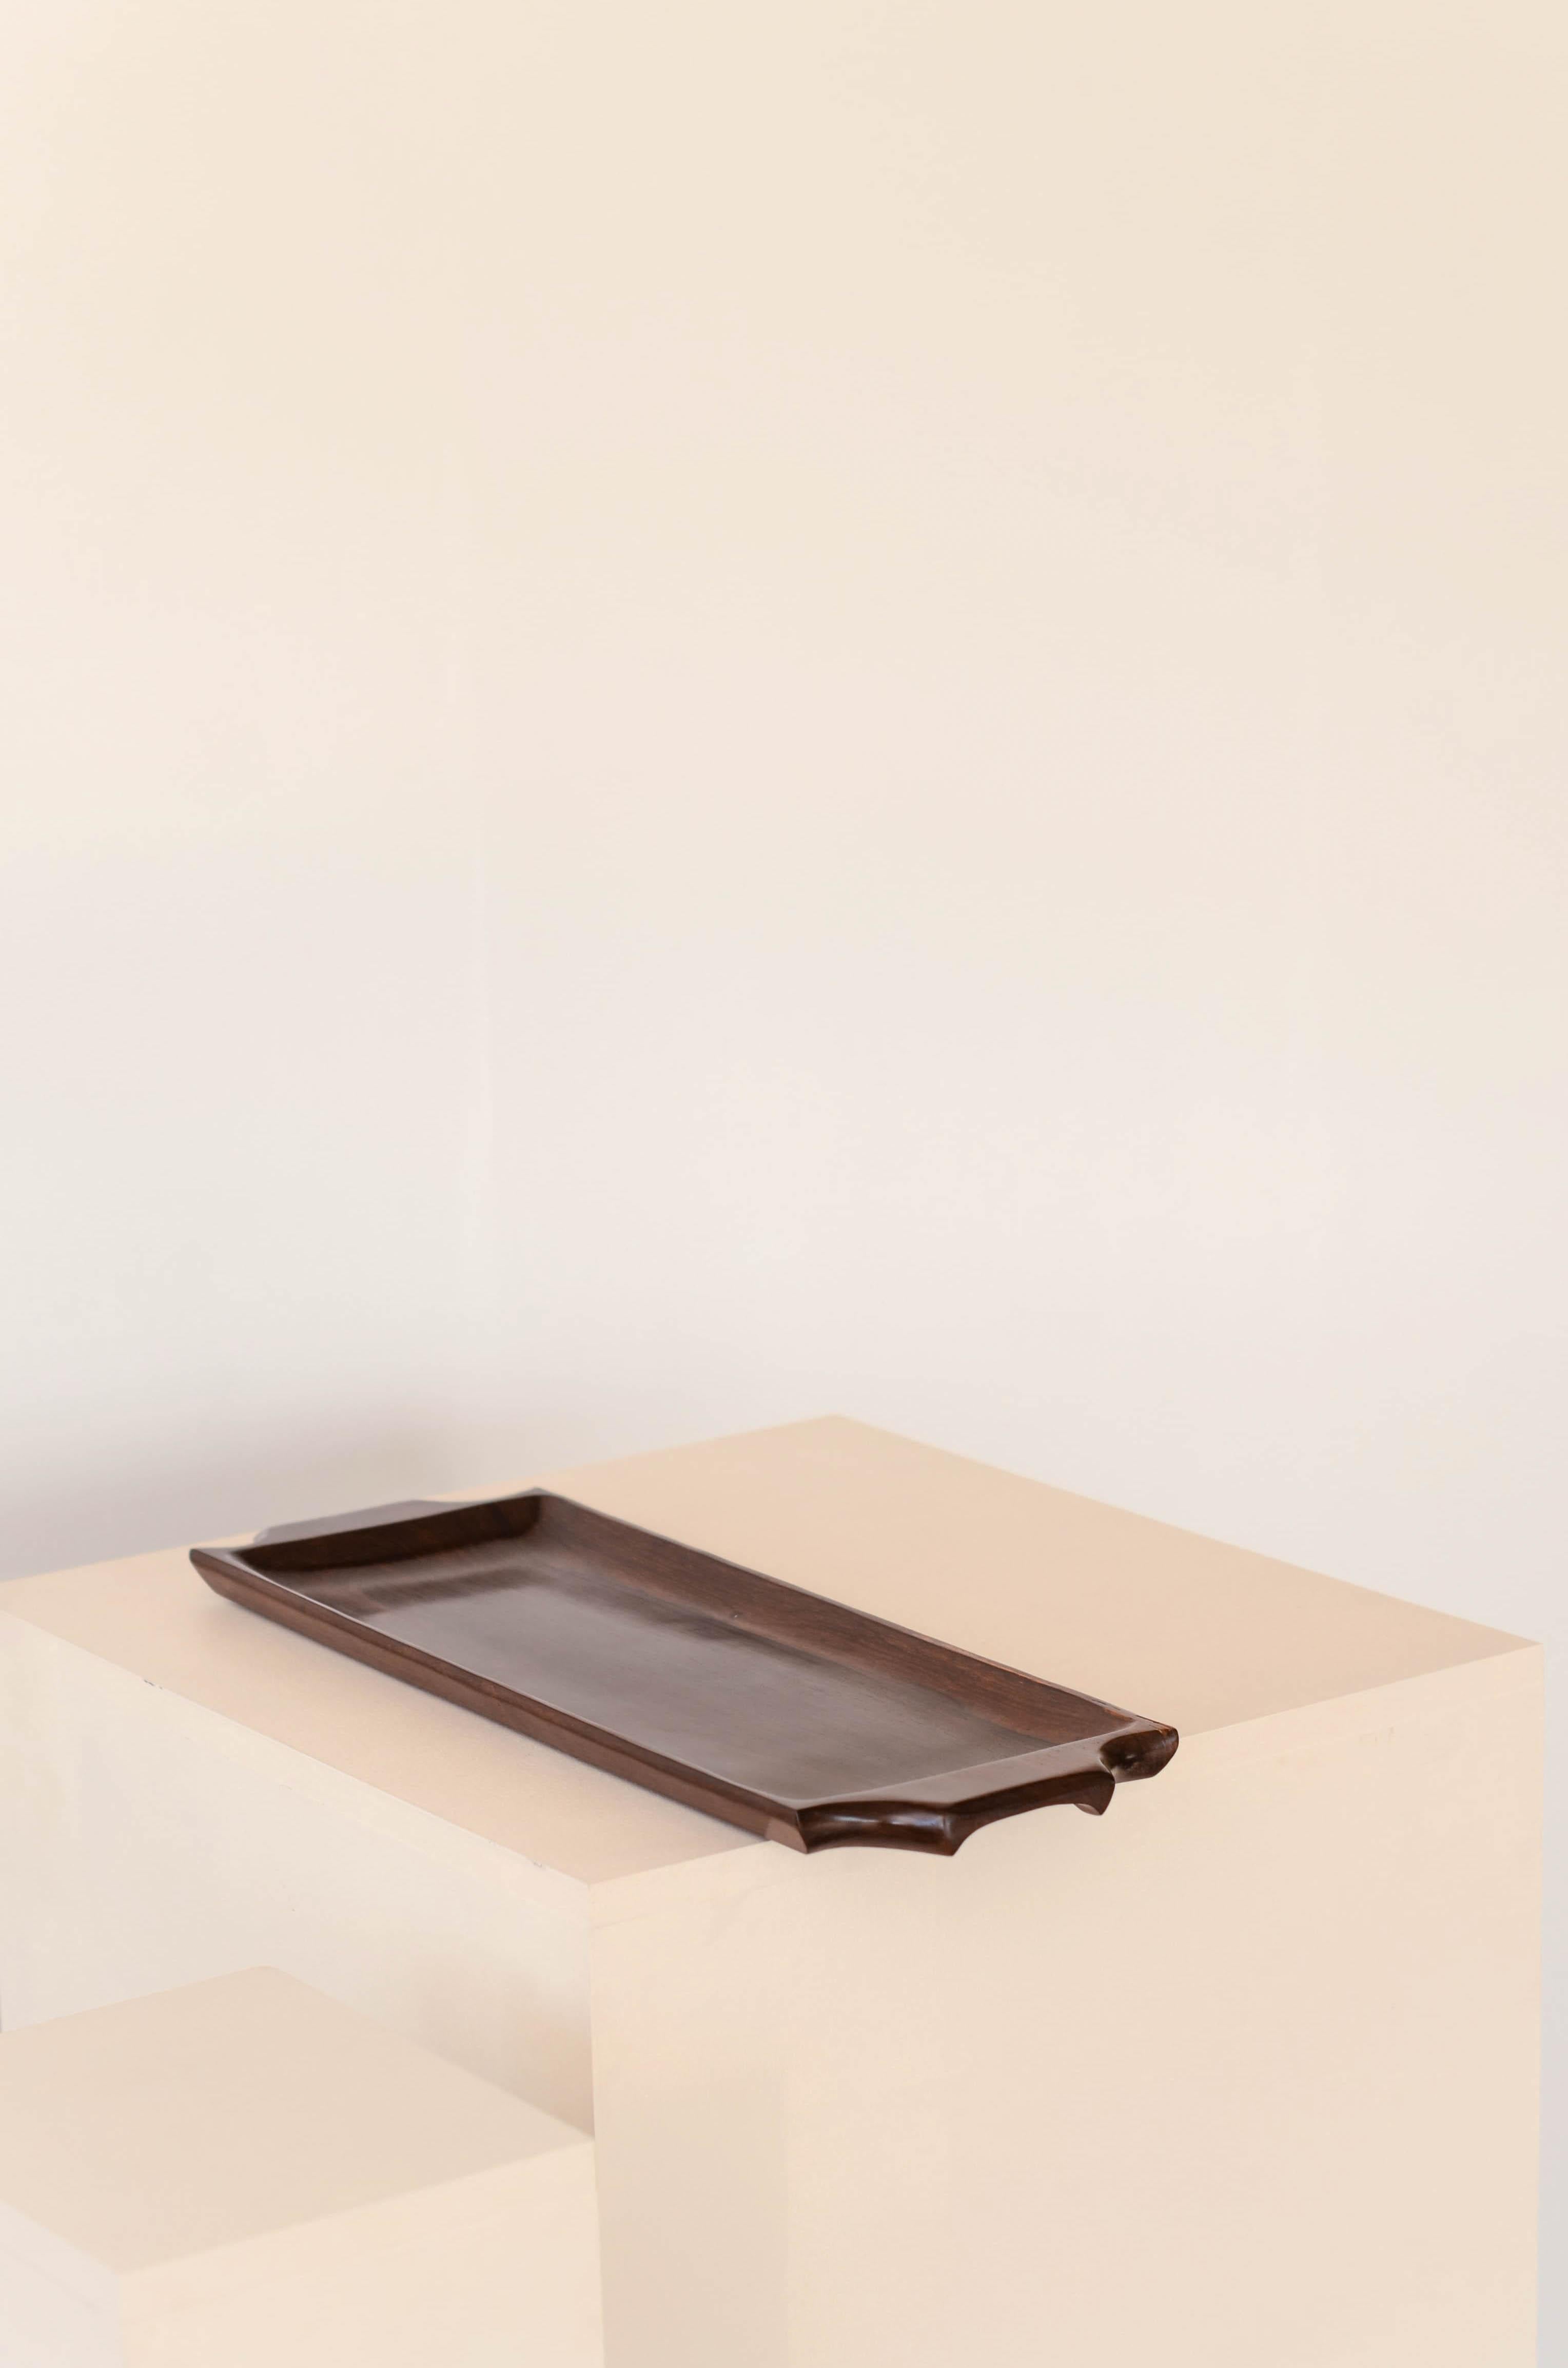 Mid-Century Modern Brazilian Midcentury Serving Tray in Rosewood, c. 1970 For Sale